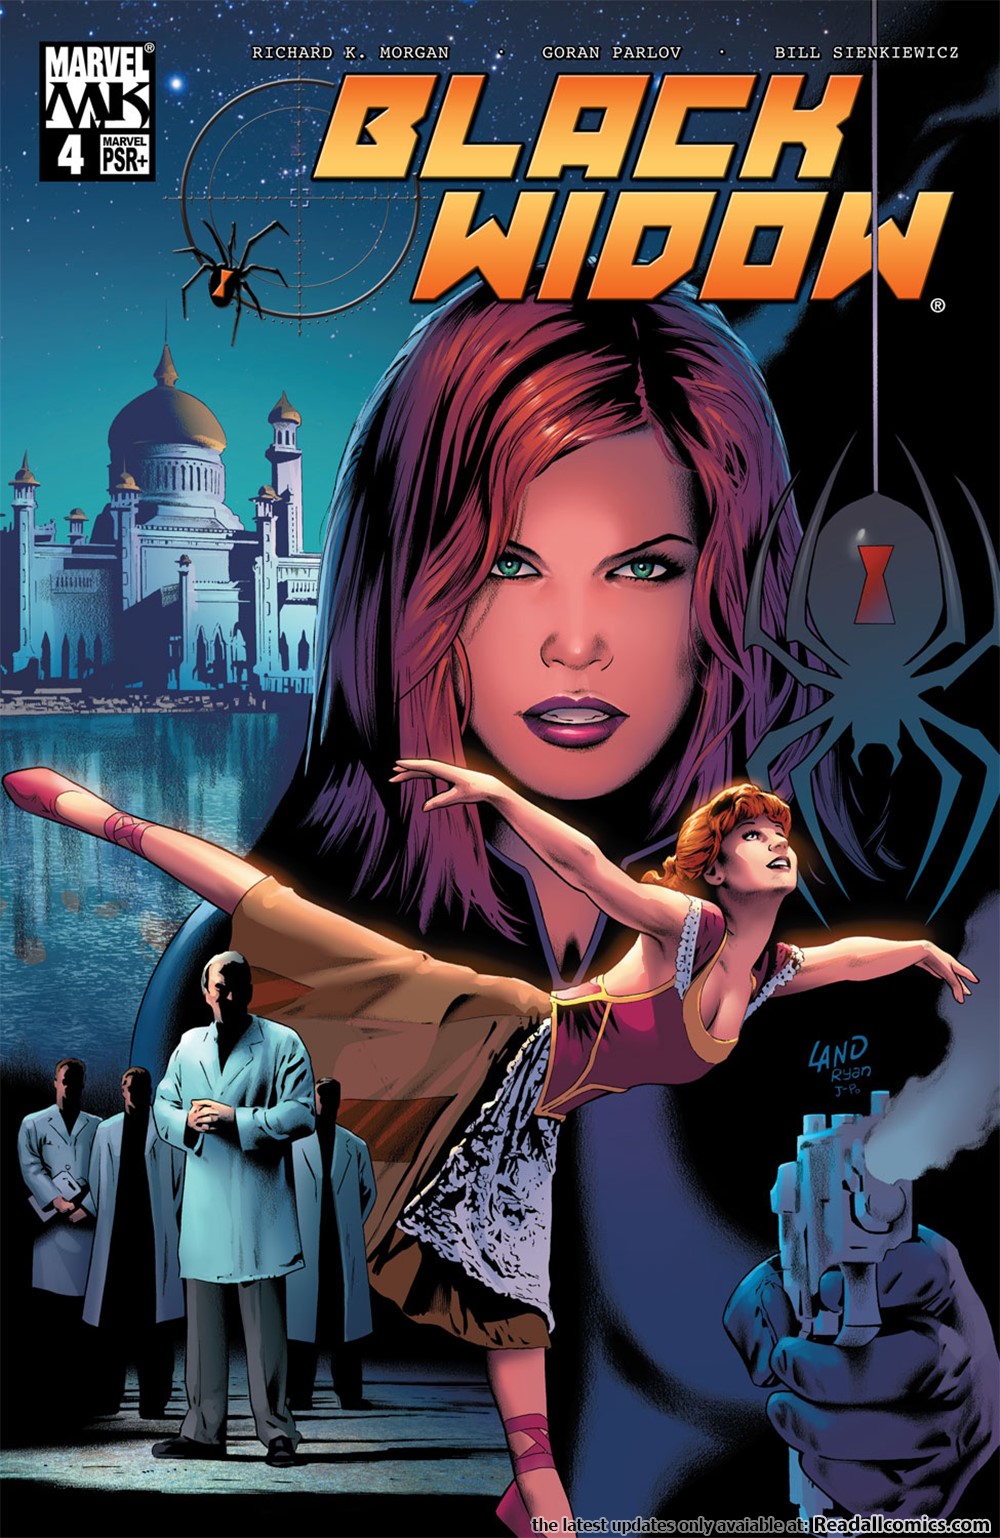 Black Widow V3 004 | Read Black Widow V3 004 comic online in high quality.  Read Full Comic online for free - Read comics online in high quality .|  READ COMIC ONLINE